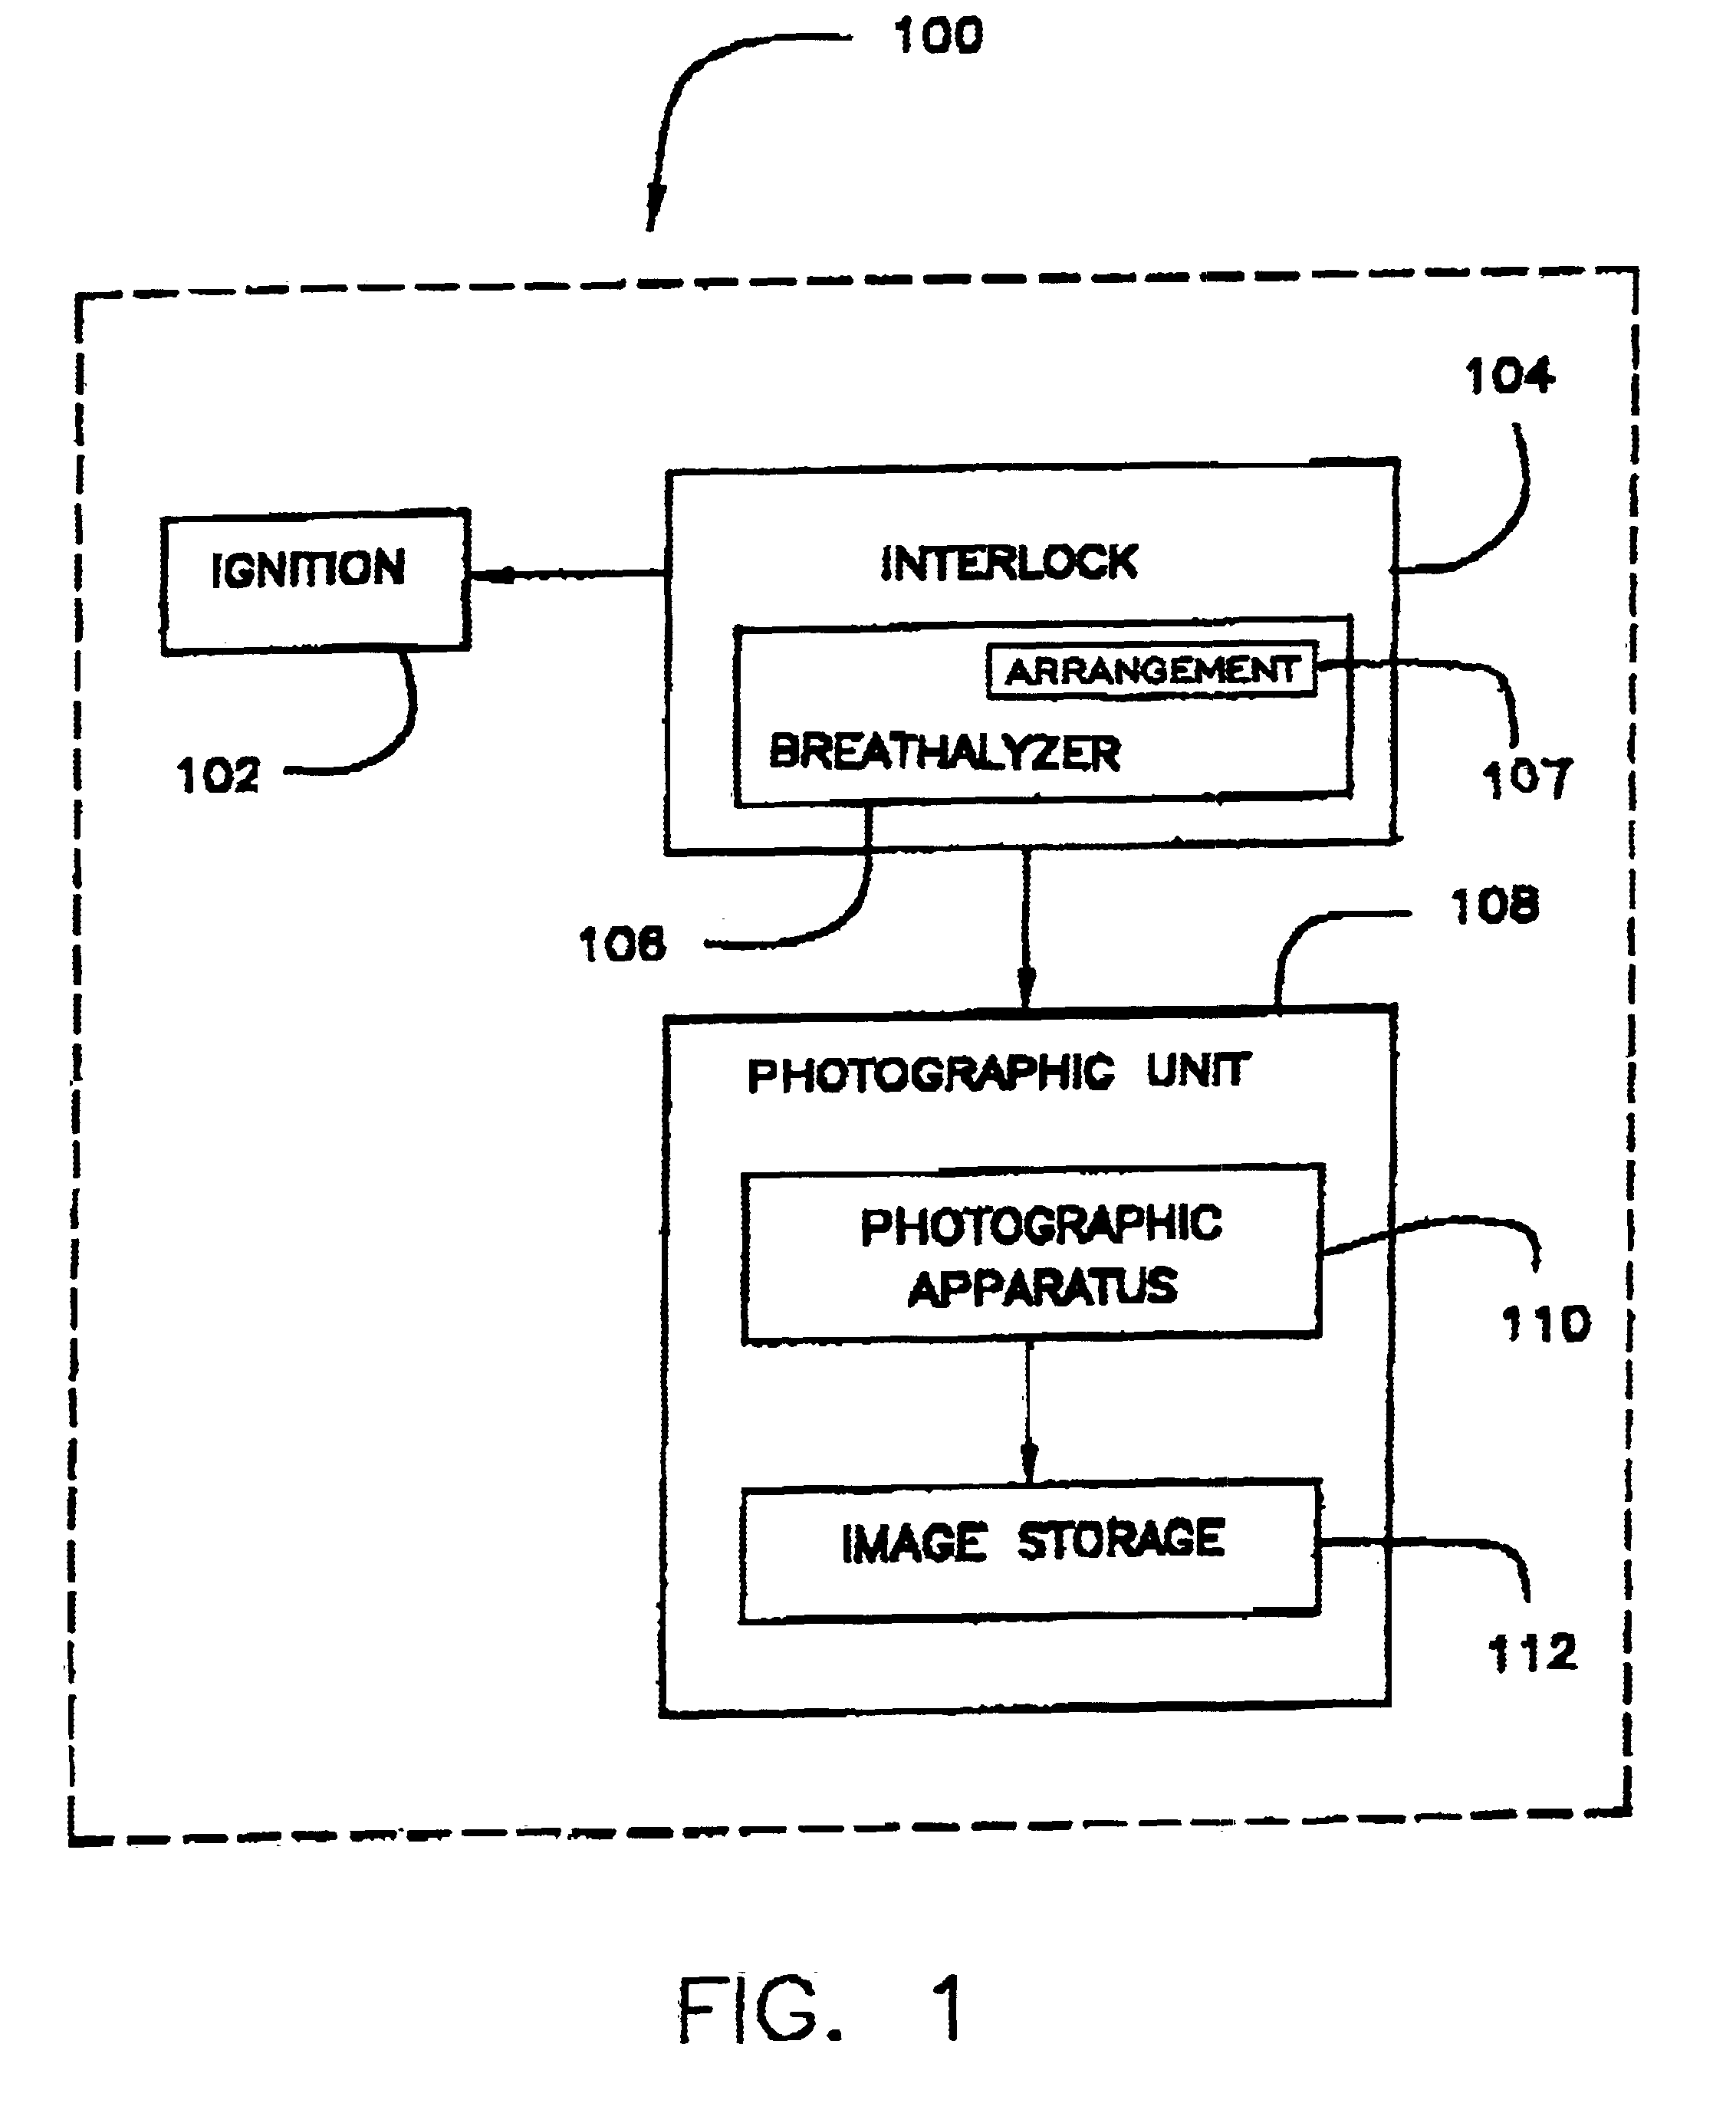 Substance testing devices with photo identification